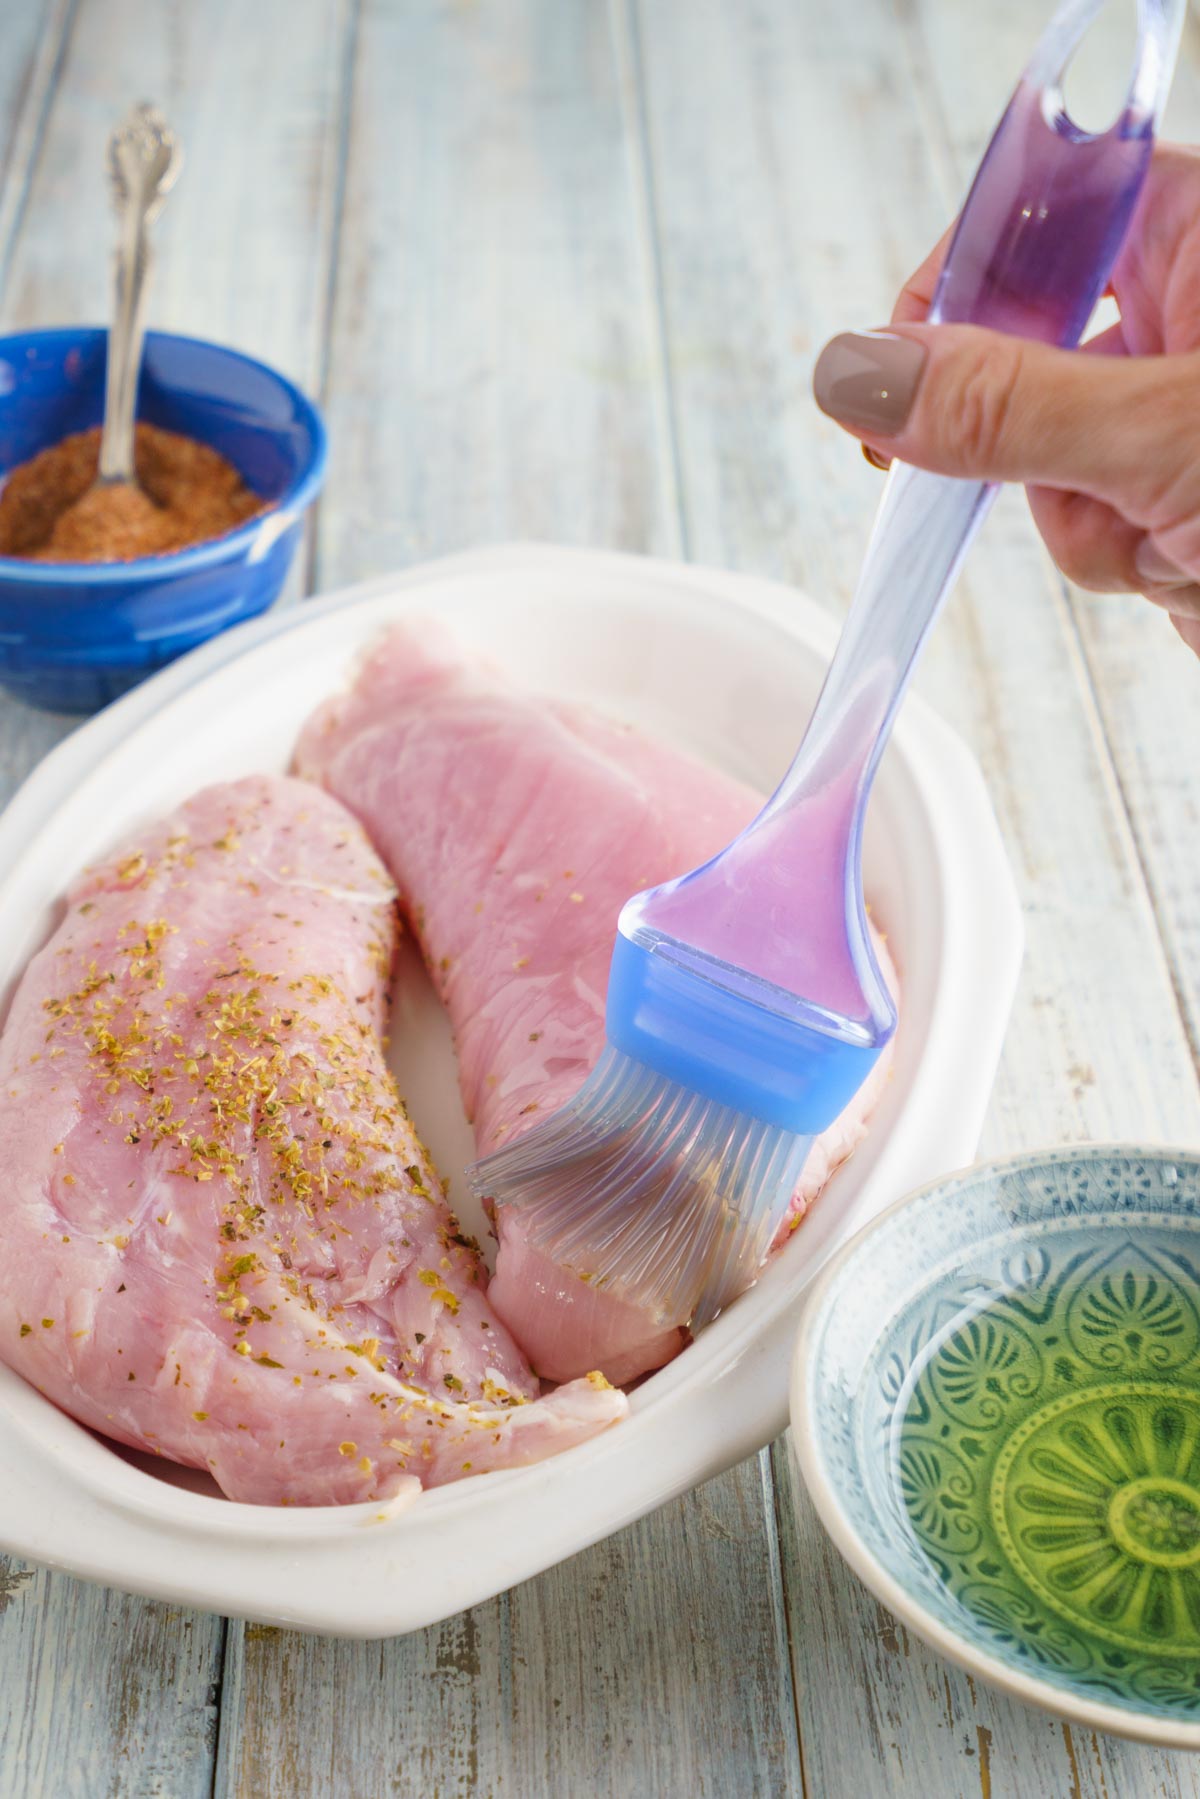 a blue silicone brush bastes poultry with a small bowl of olive oil and a rub next to it.